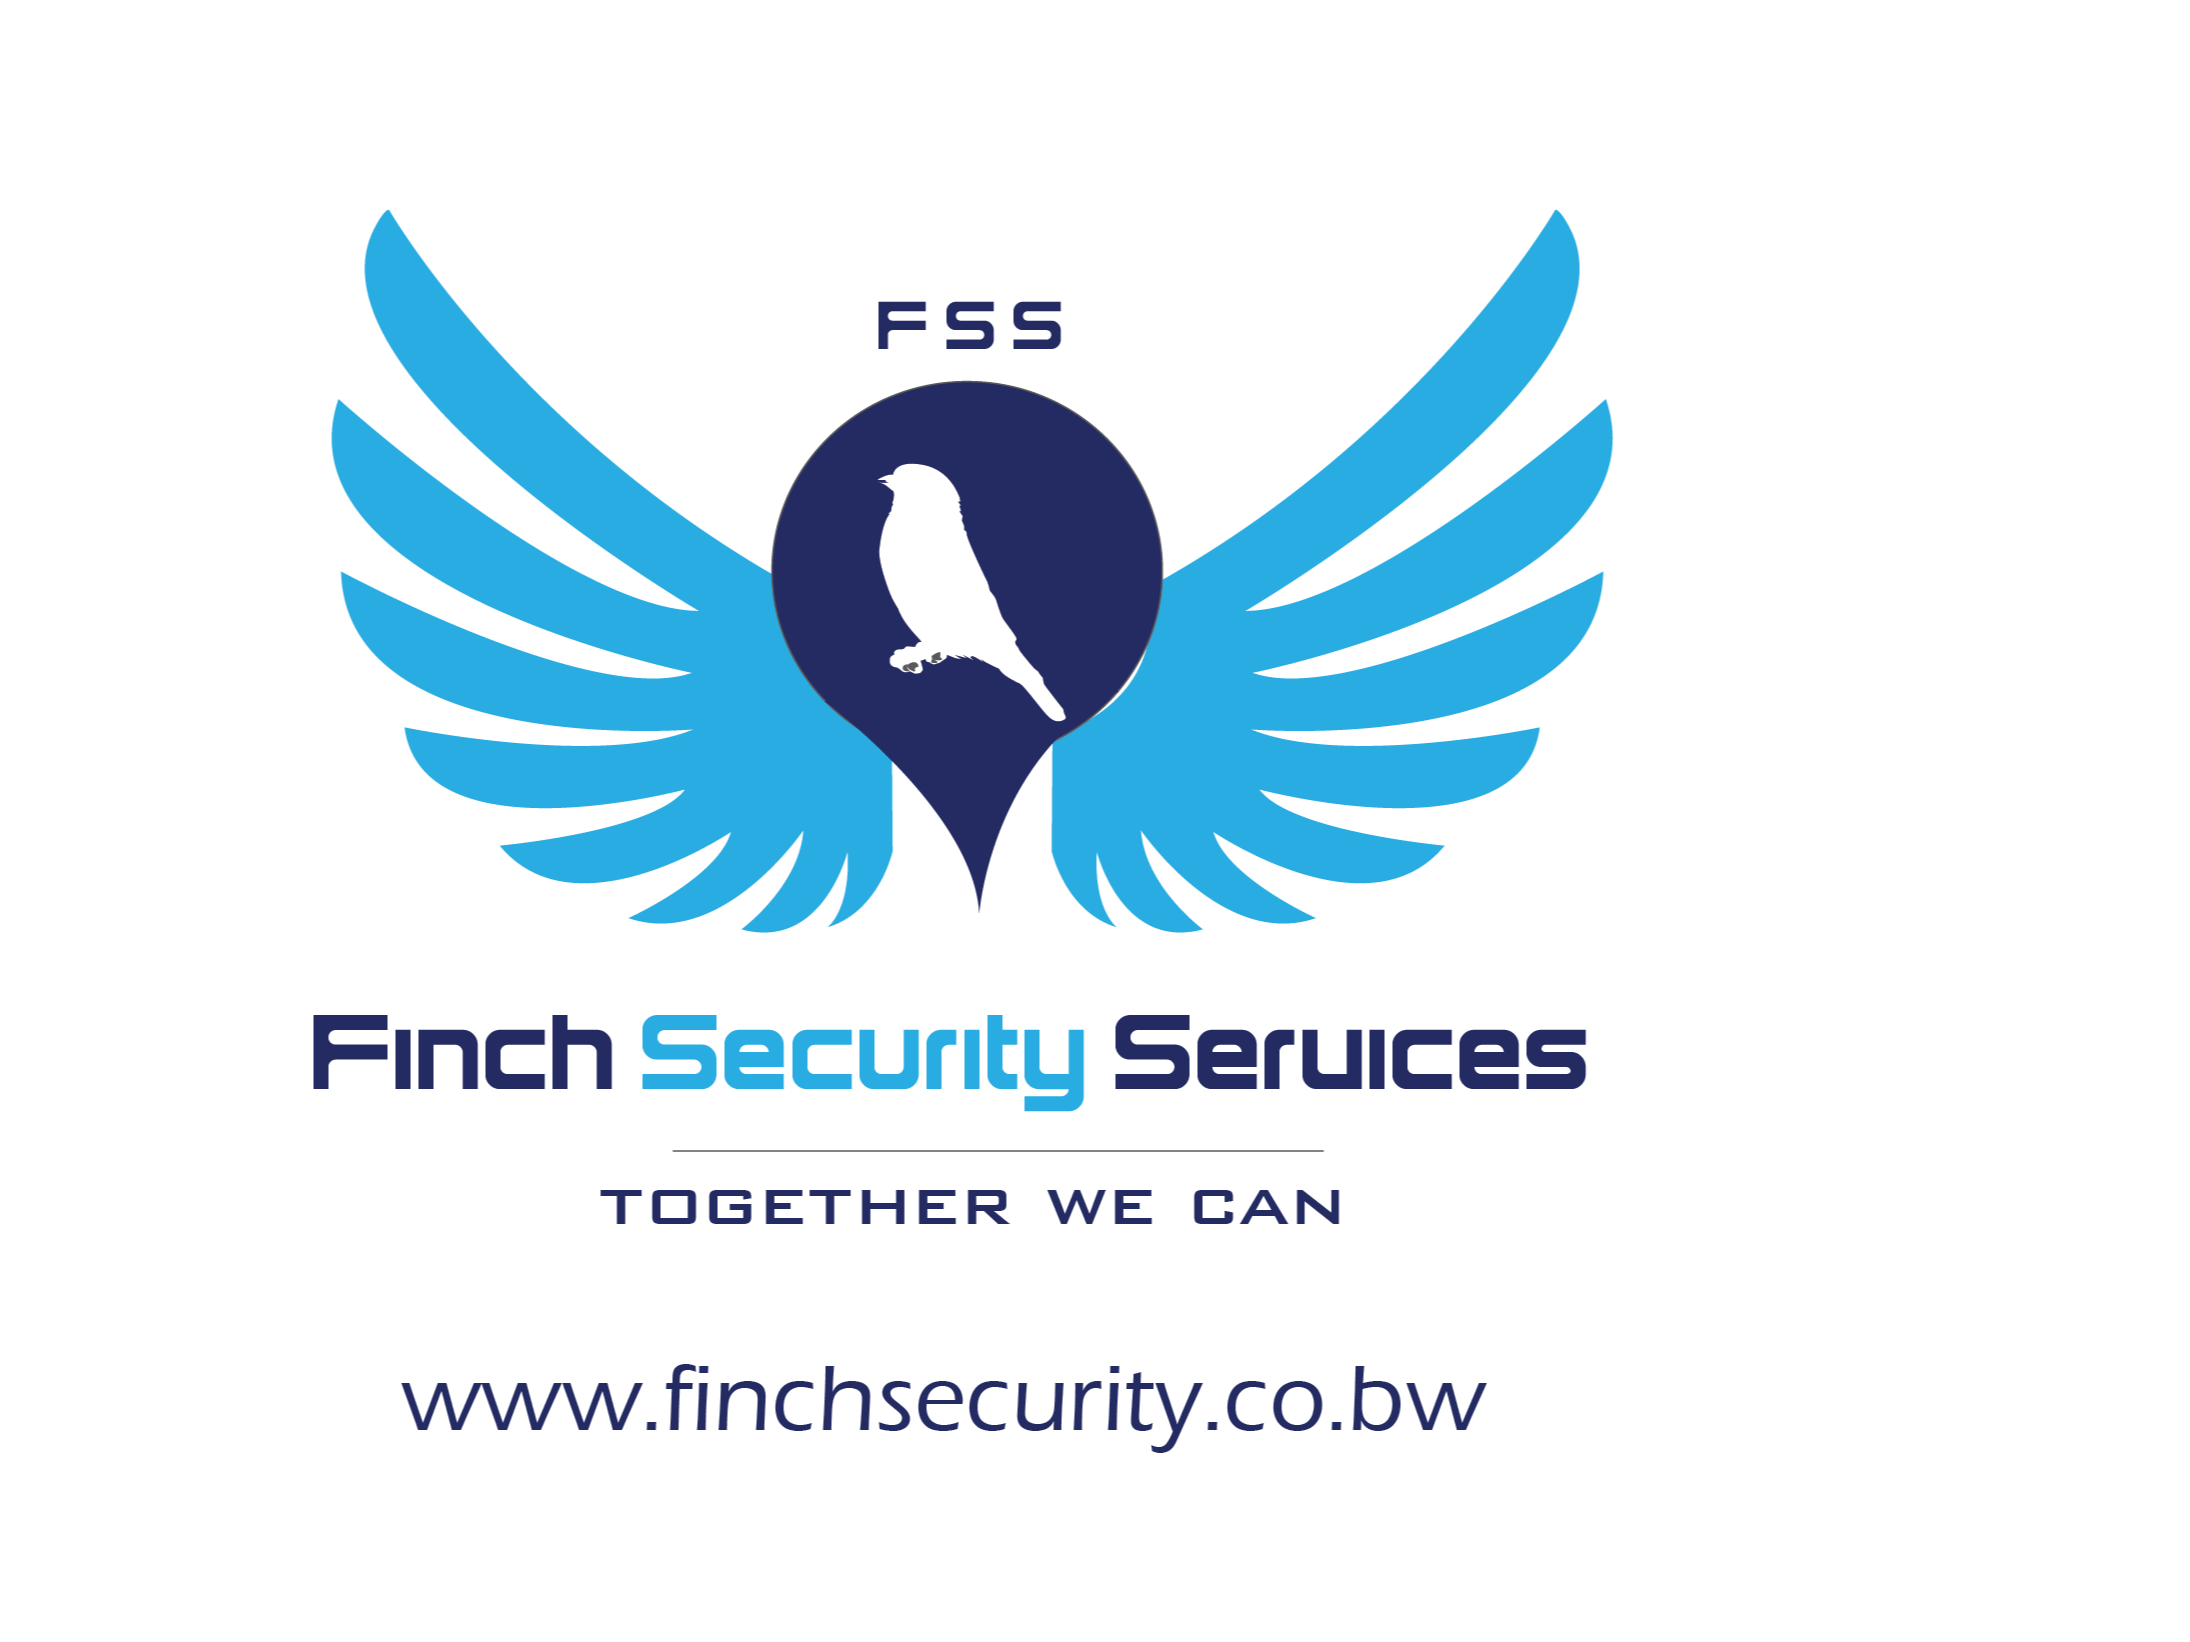 Finch Security Services logo